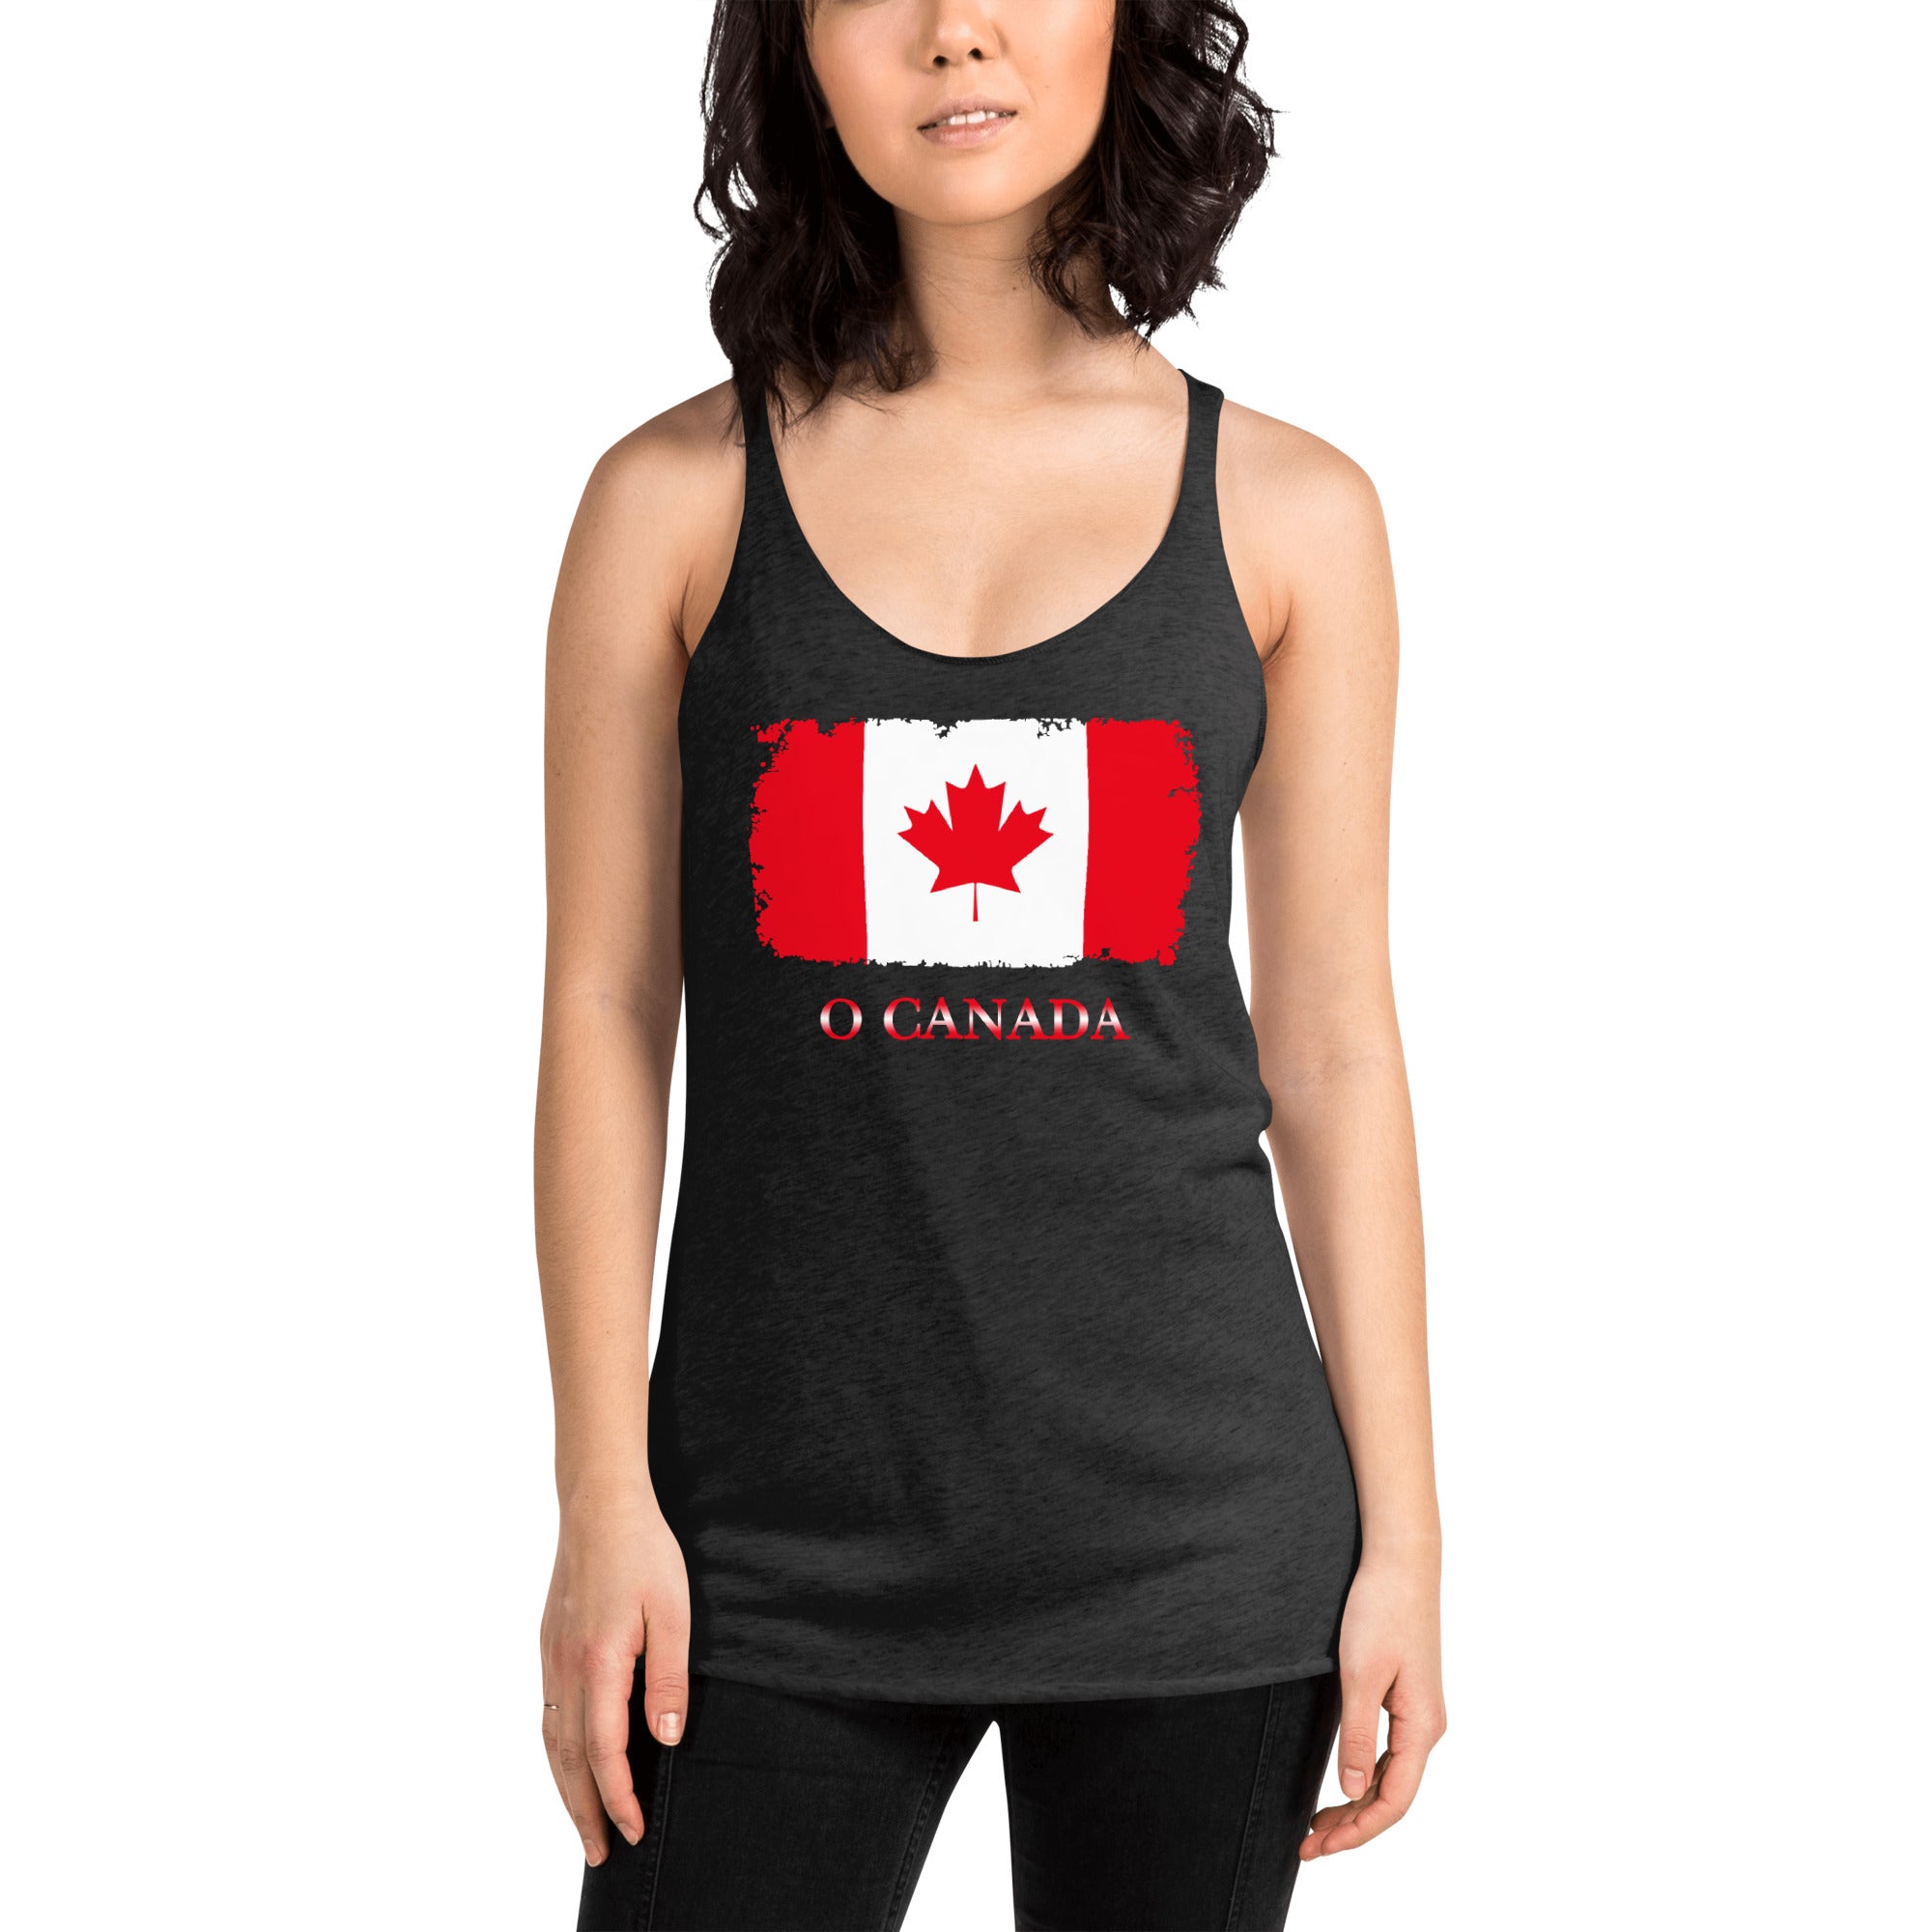 The Official Flag of Canada Maple Leaf Women's Racerback Tank Top Shirt